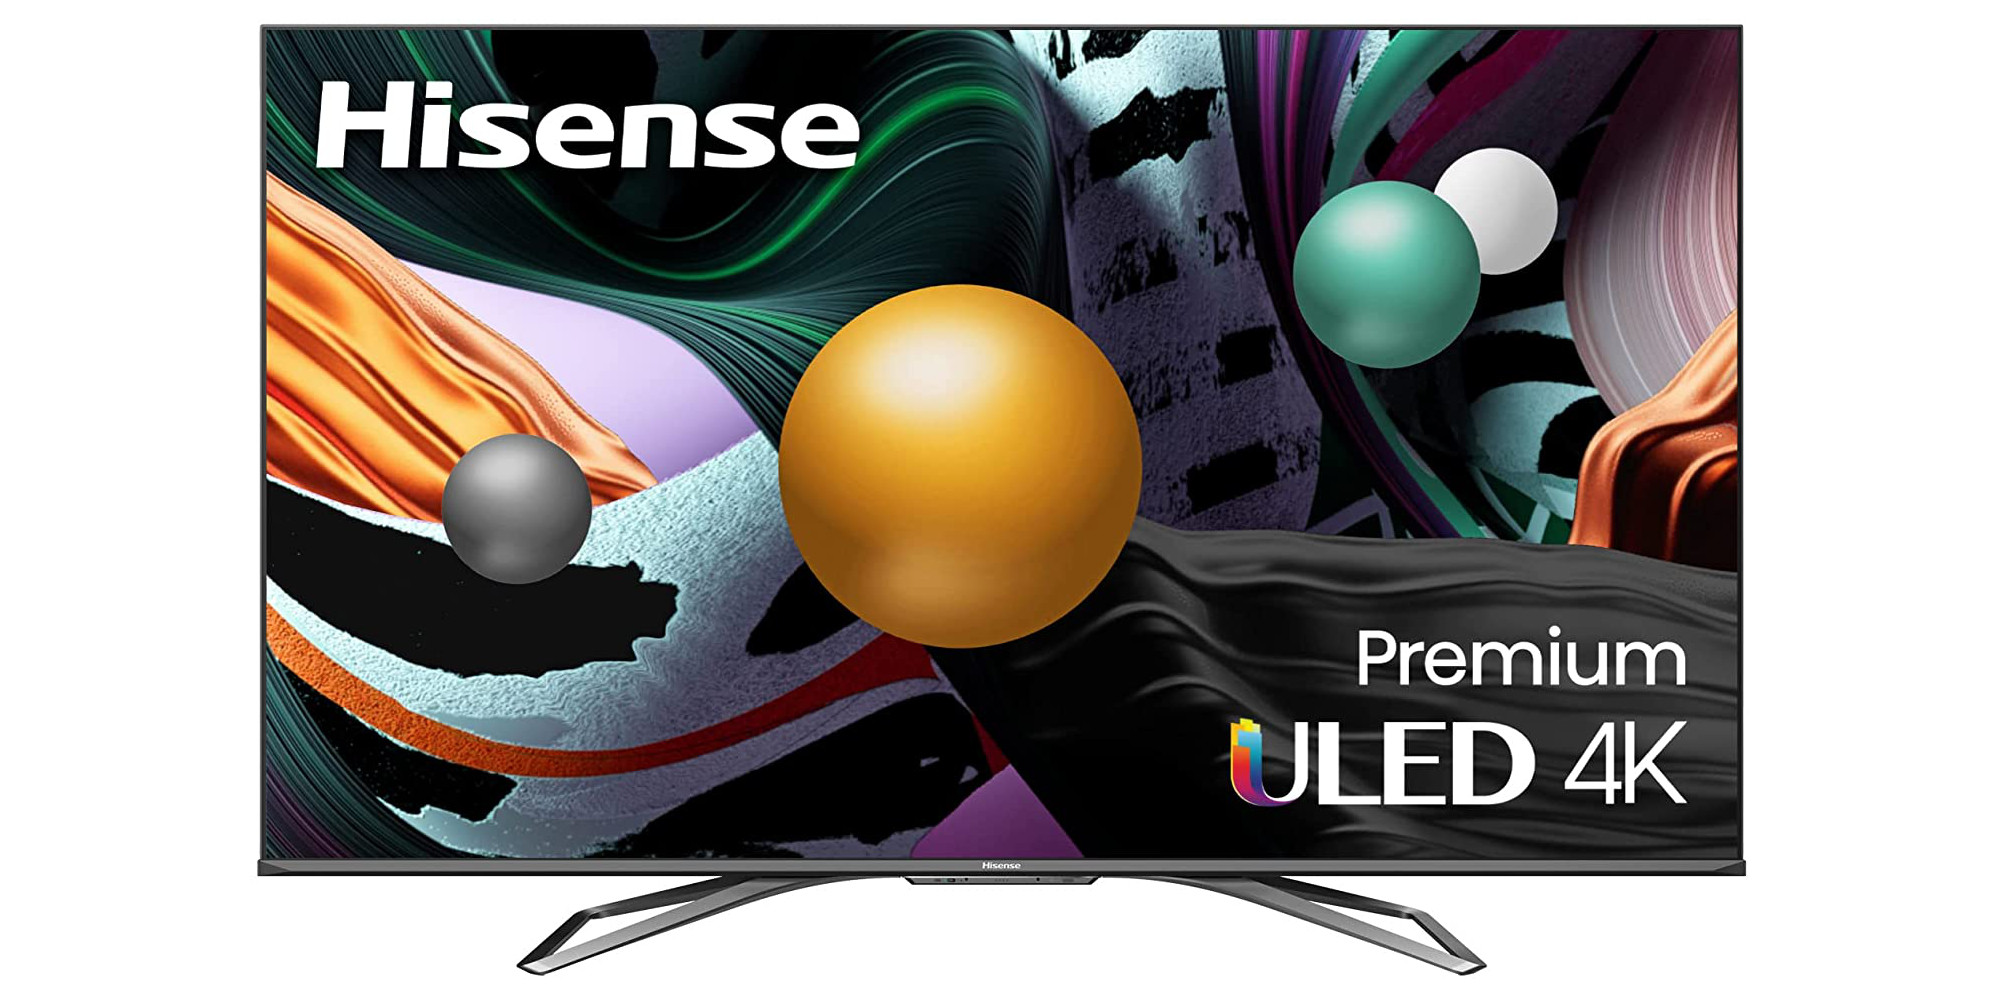 Hisense QLED 55-inch 120Hz Android 4K Smart TV with HDMI 2.1 hits 